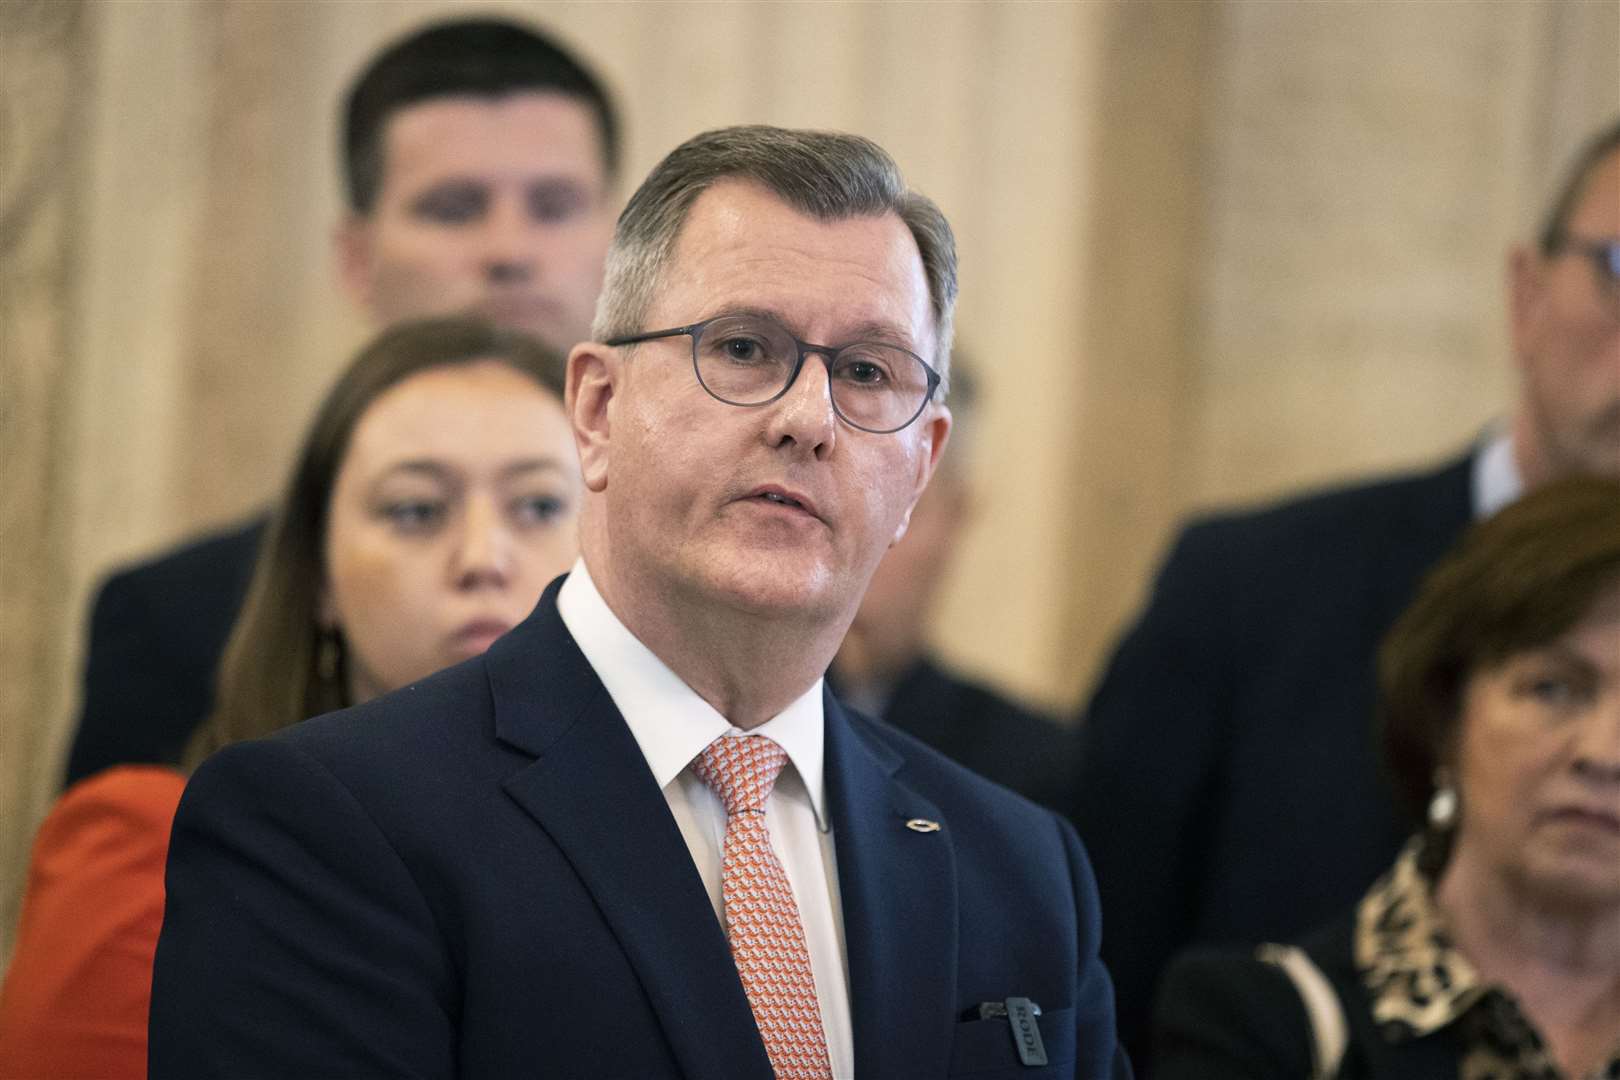 DUP Leader Sir Jeffrey Donaldson said the unionist viewpoint can no longer be ignored (Liam McBurney/PA)